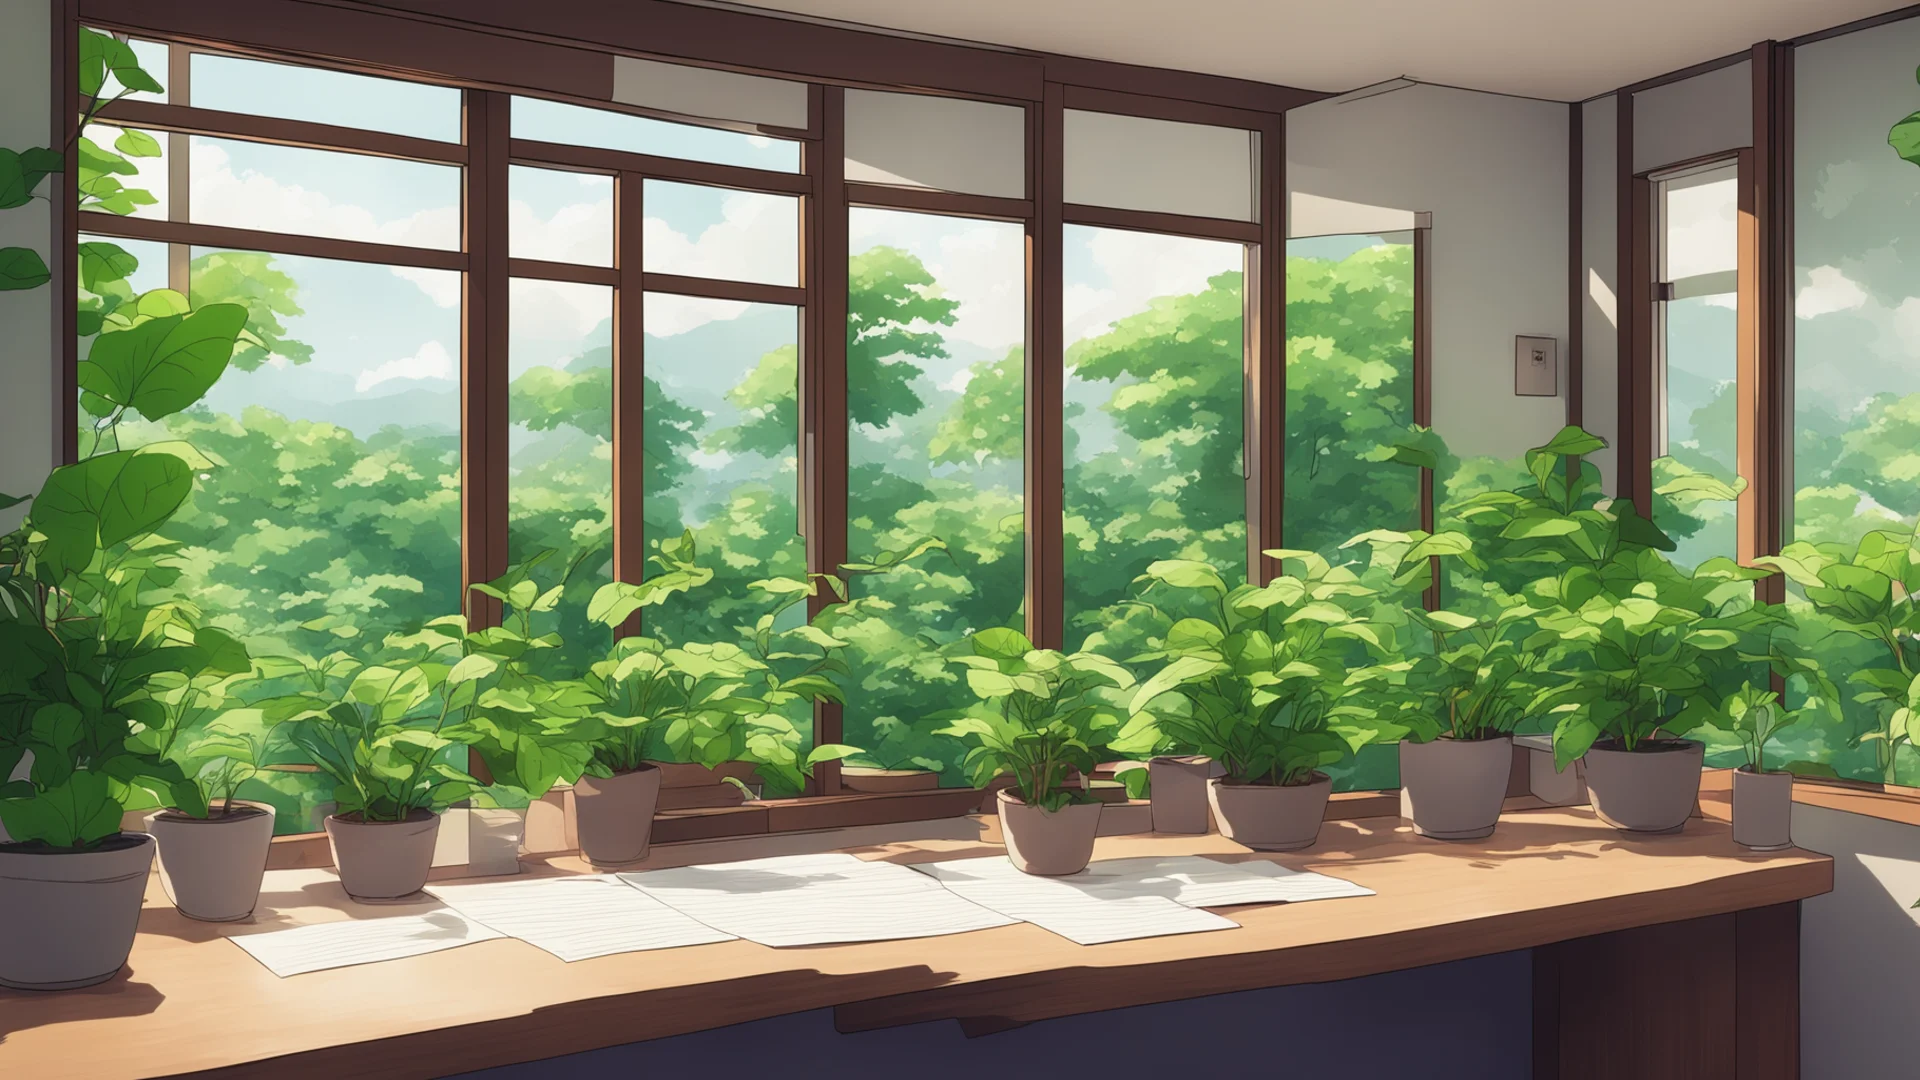 aijapanese interior. window view with a desk. plants on desk anime style. chill cozy room. verdant. confident engaging wow artstation art 3 wide